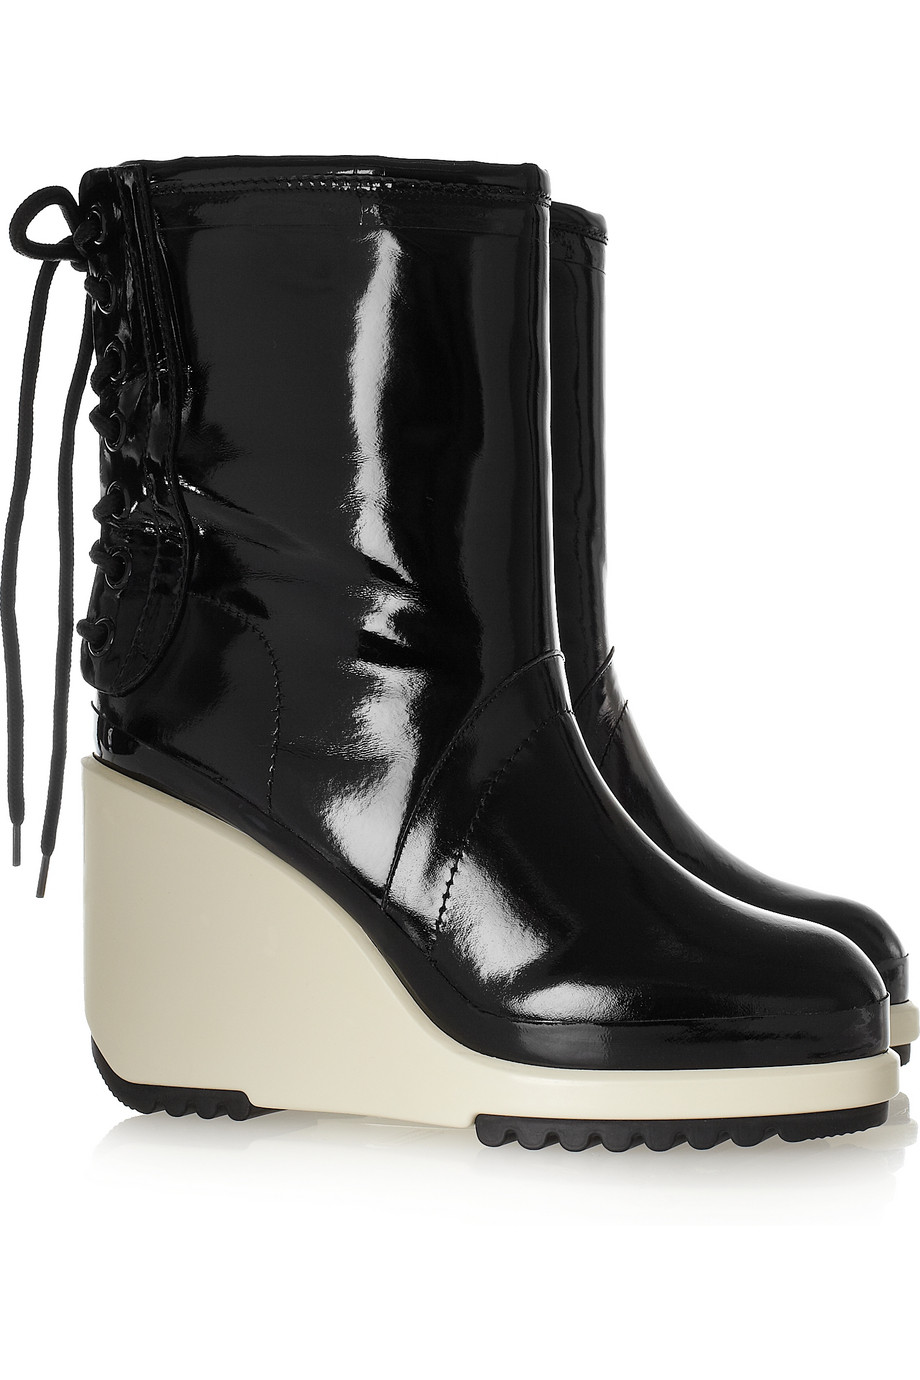 Marc Jacobs Patent-leather Wedge Boots in Black - Lyst